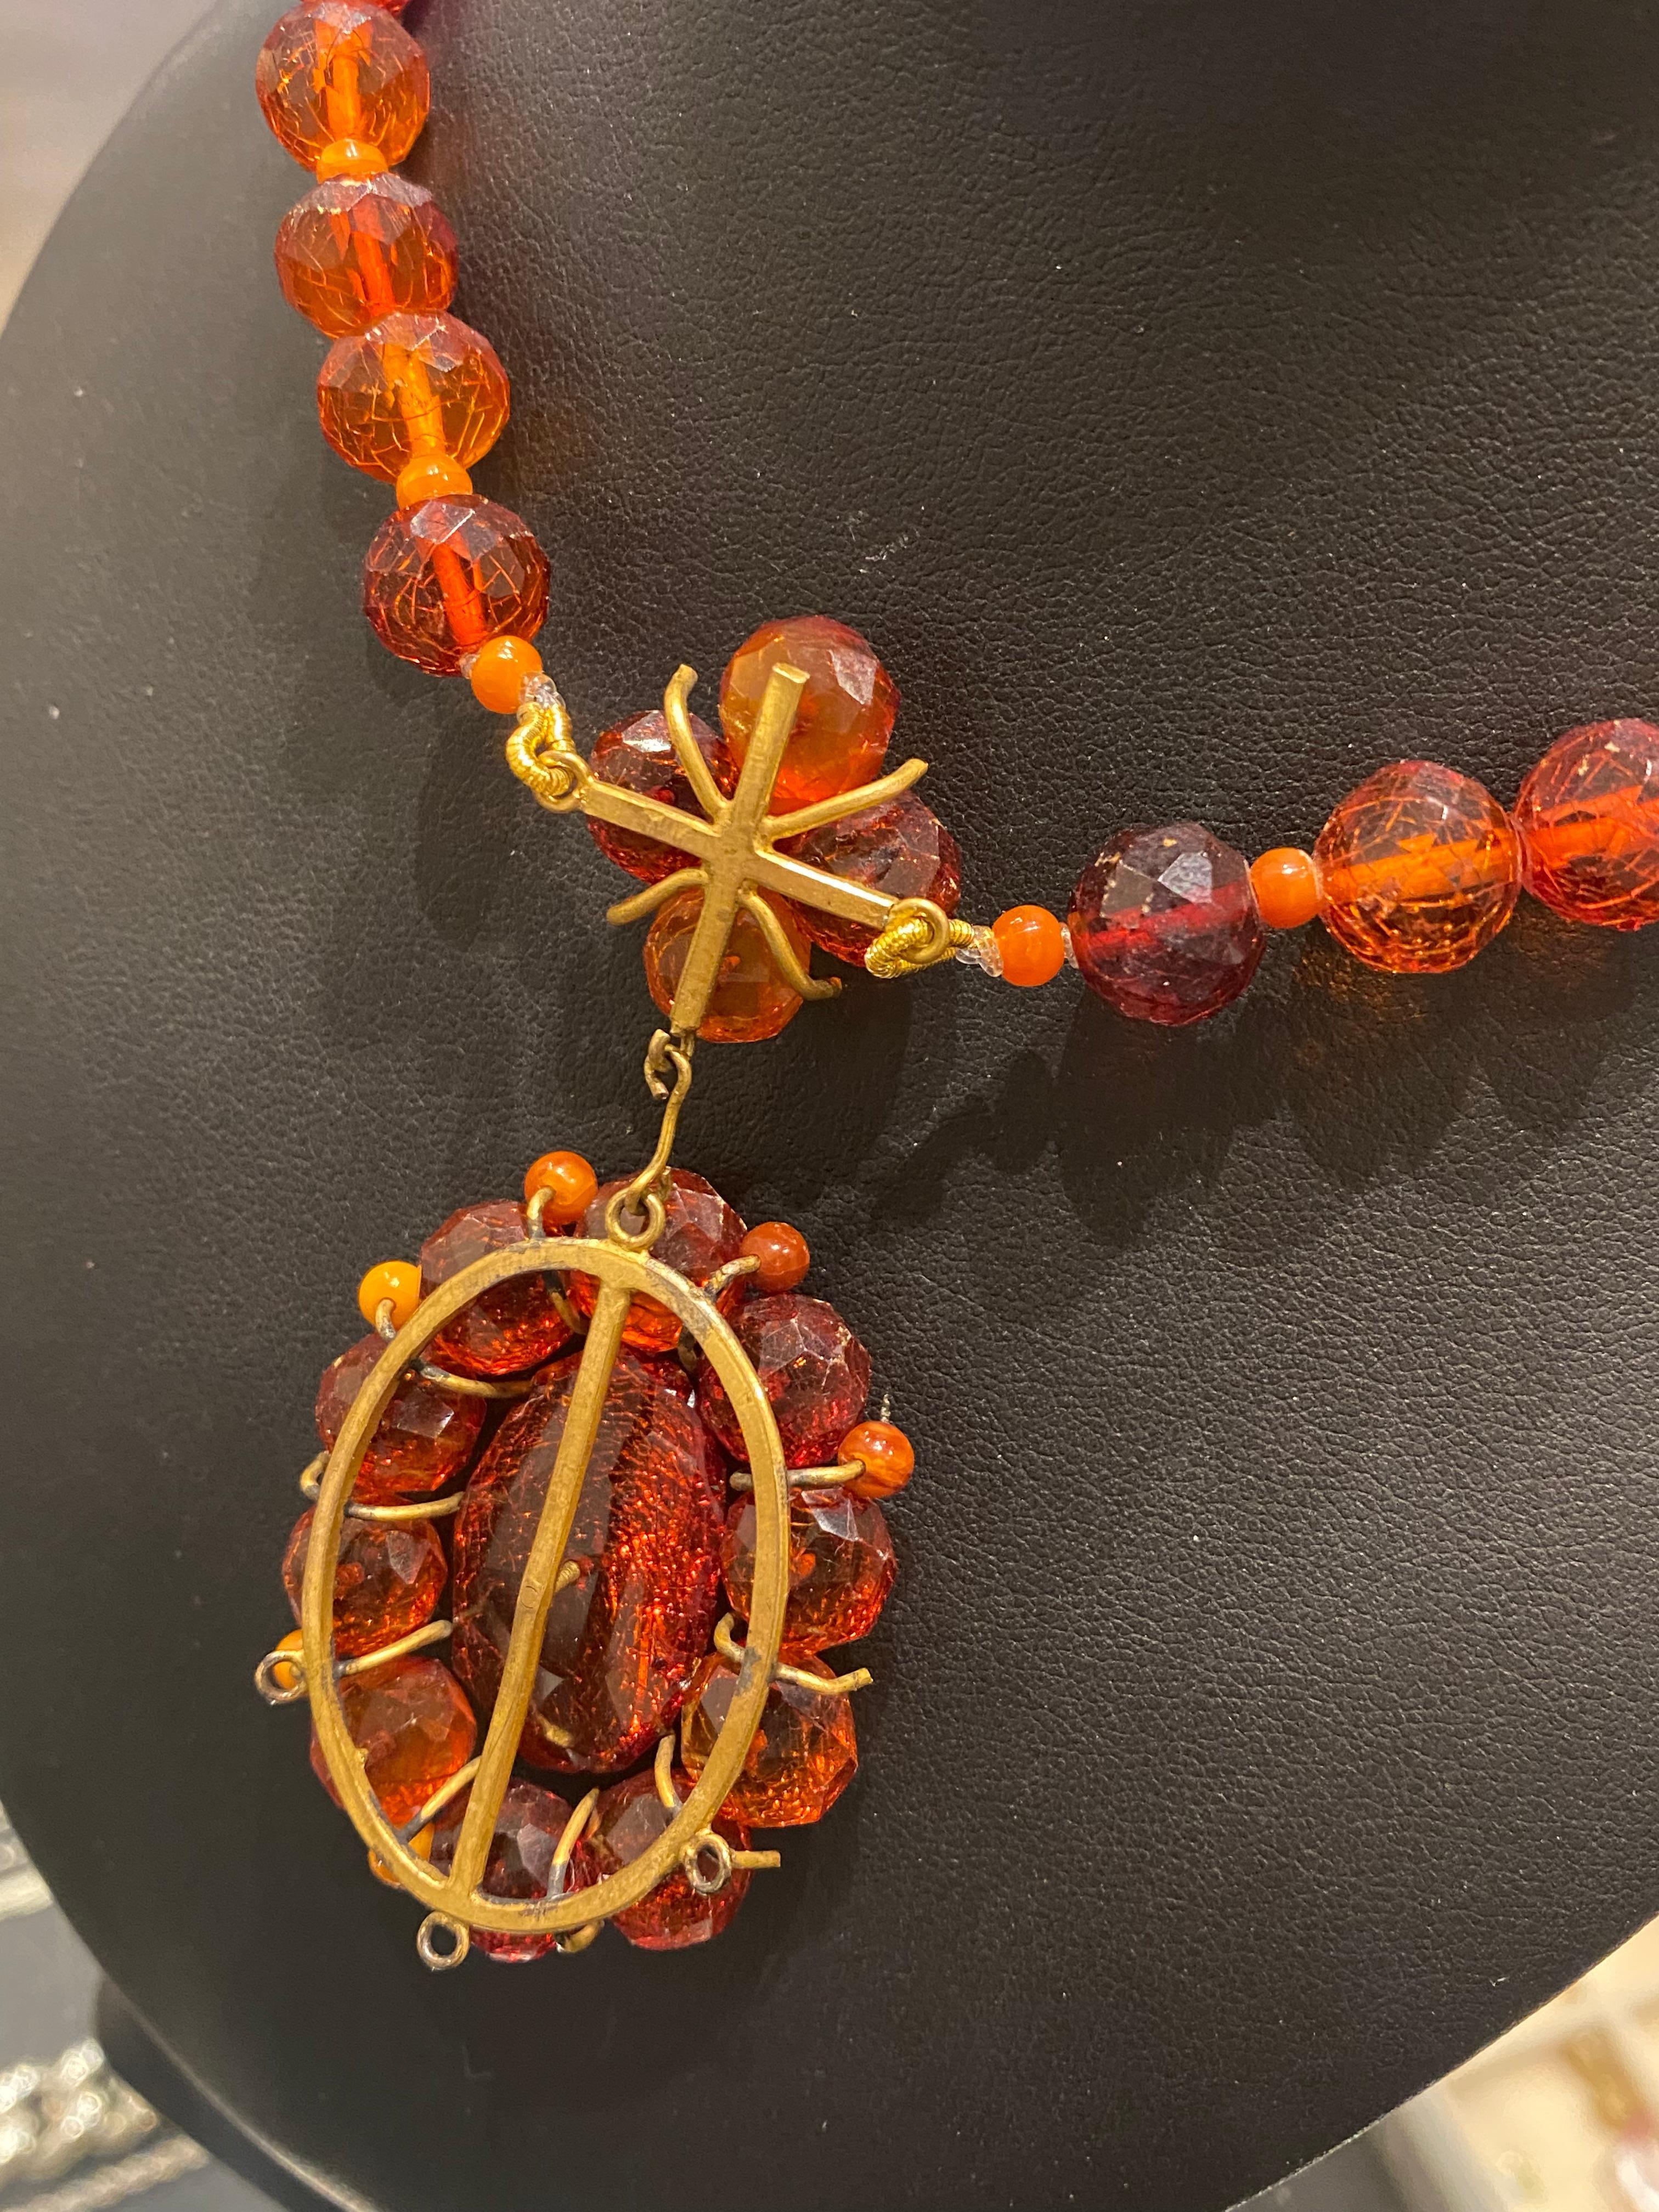 Oval Cut Antique Italian Natural Amber Necklace & Pendant, 9K Gold Clasp, 49cm long. For Sale